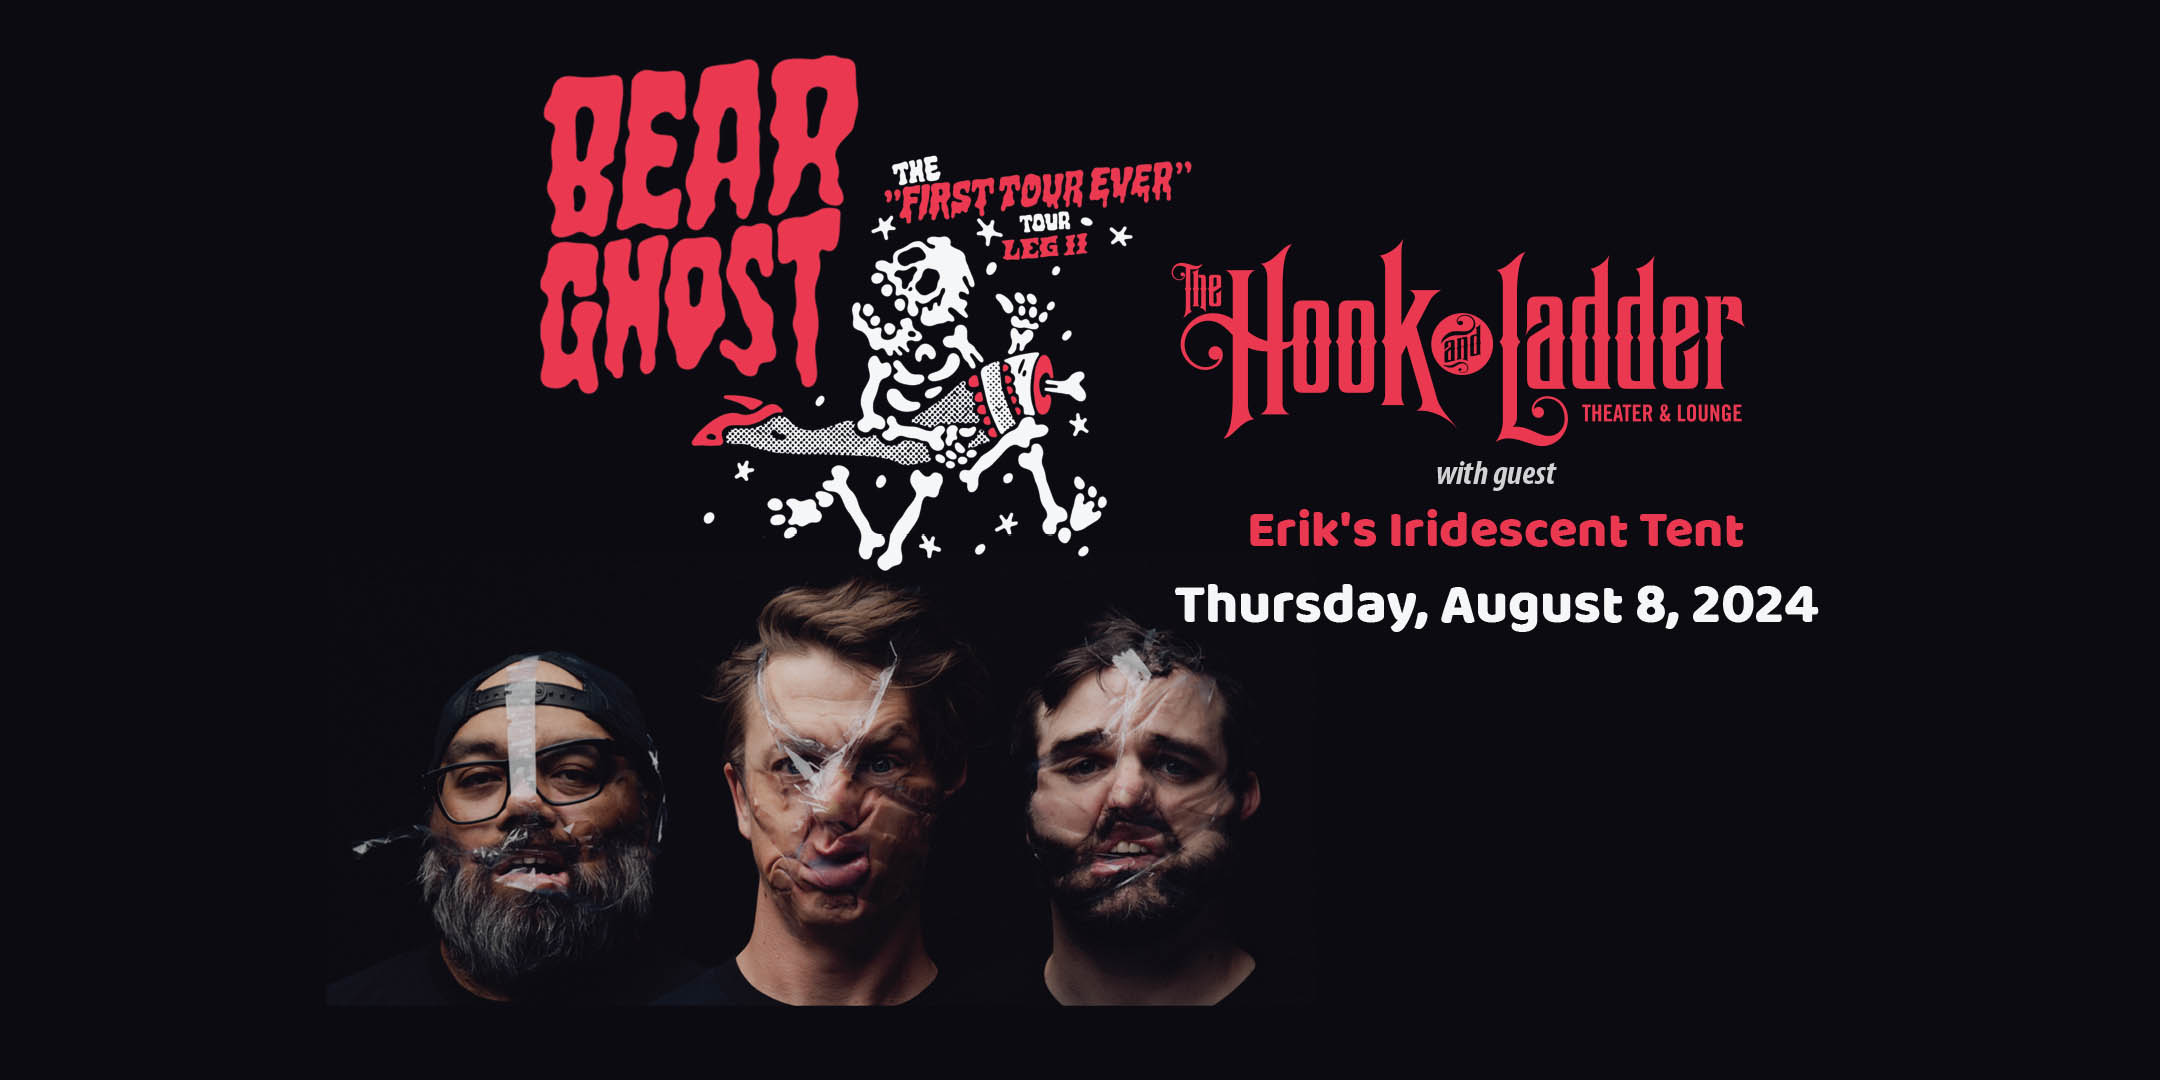 Bear Ghost with guests Erik's Iridescent Tent Thursday, August 8, 2024 Doors 7:00pm :: Music 8:00pm :: 21+ General Admission: $20 ADV / $25 DOS Does not include fees / No Refunds